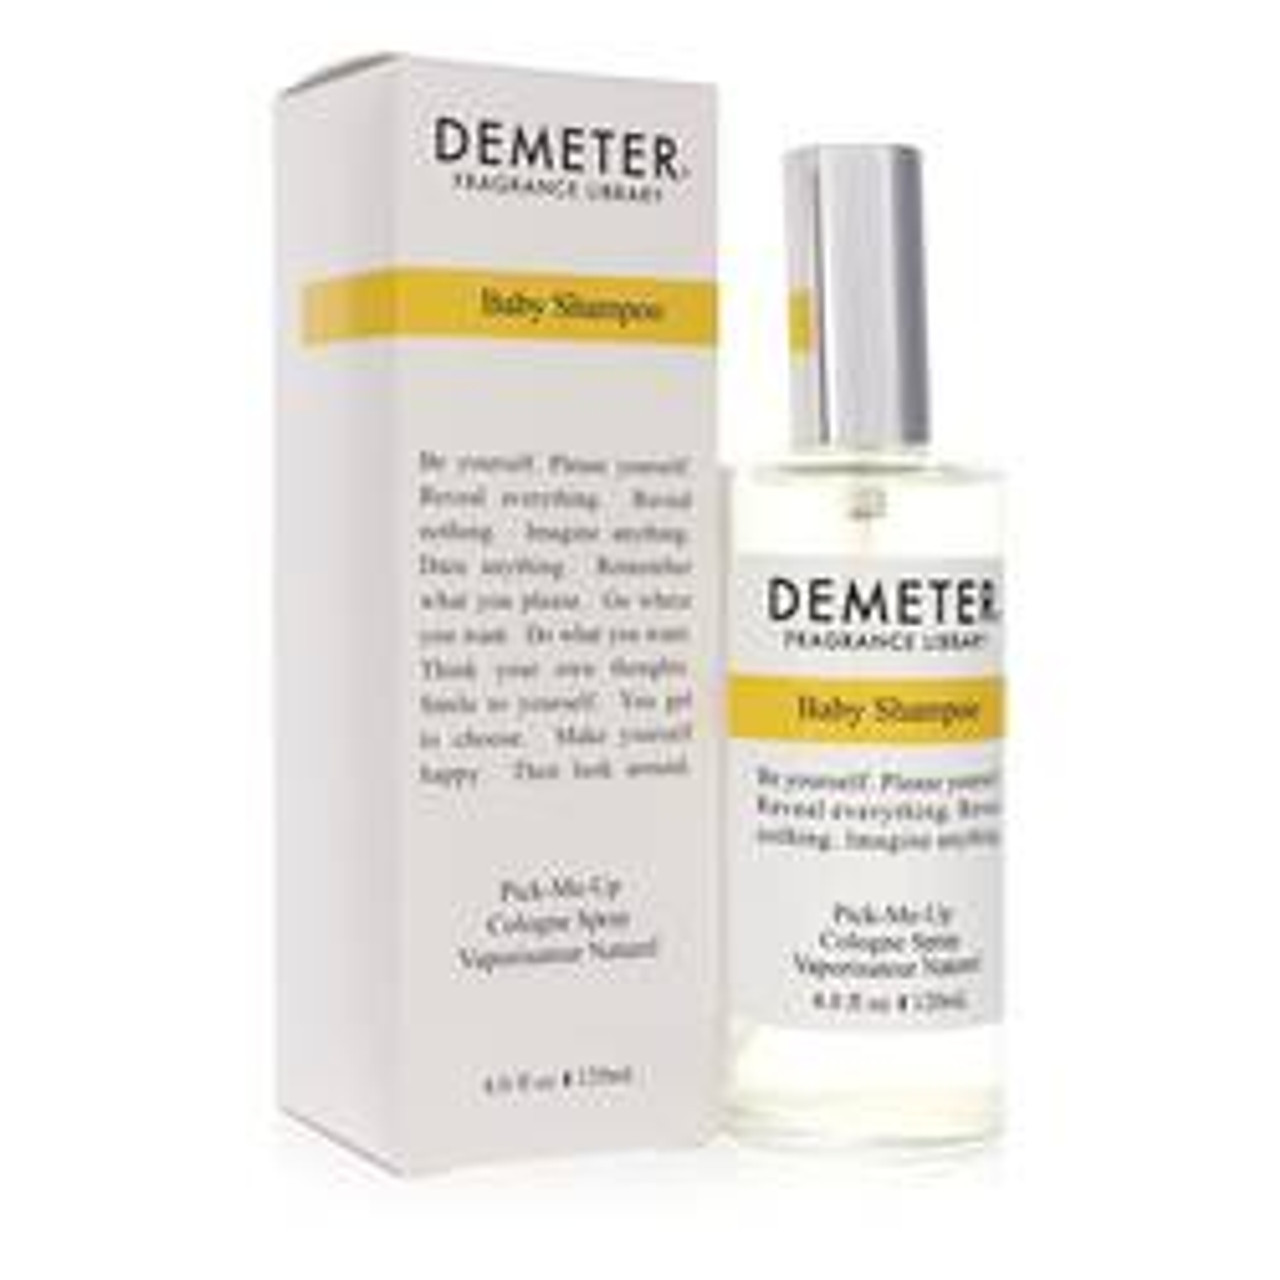 Demeter Baby Shampoo Perfume By Demeter Cologne Spray 4 oz for Women - [From 79.50 - Choose pk Qty ] - *Ships from Miami